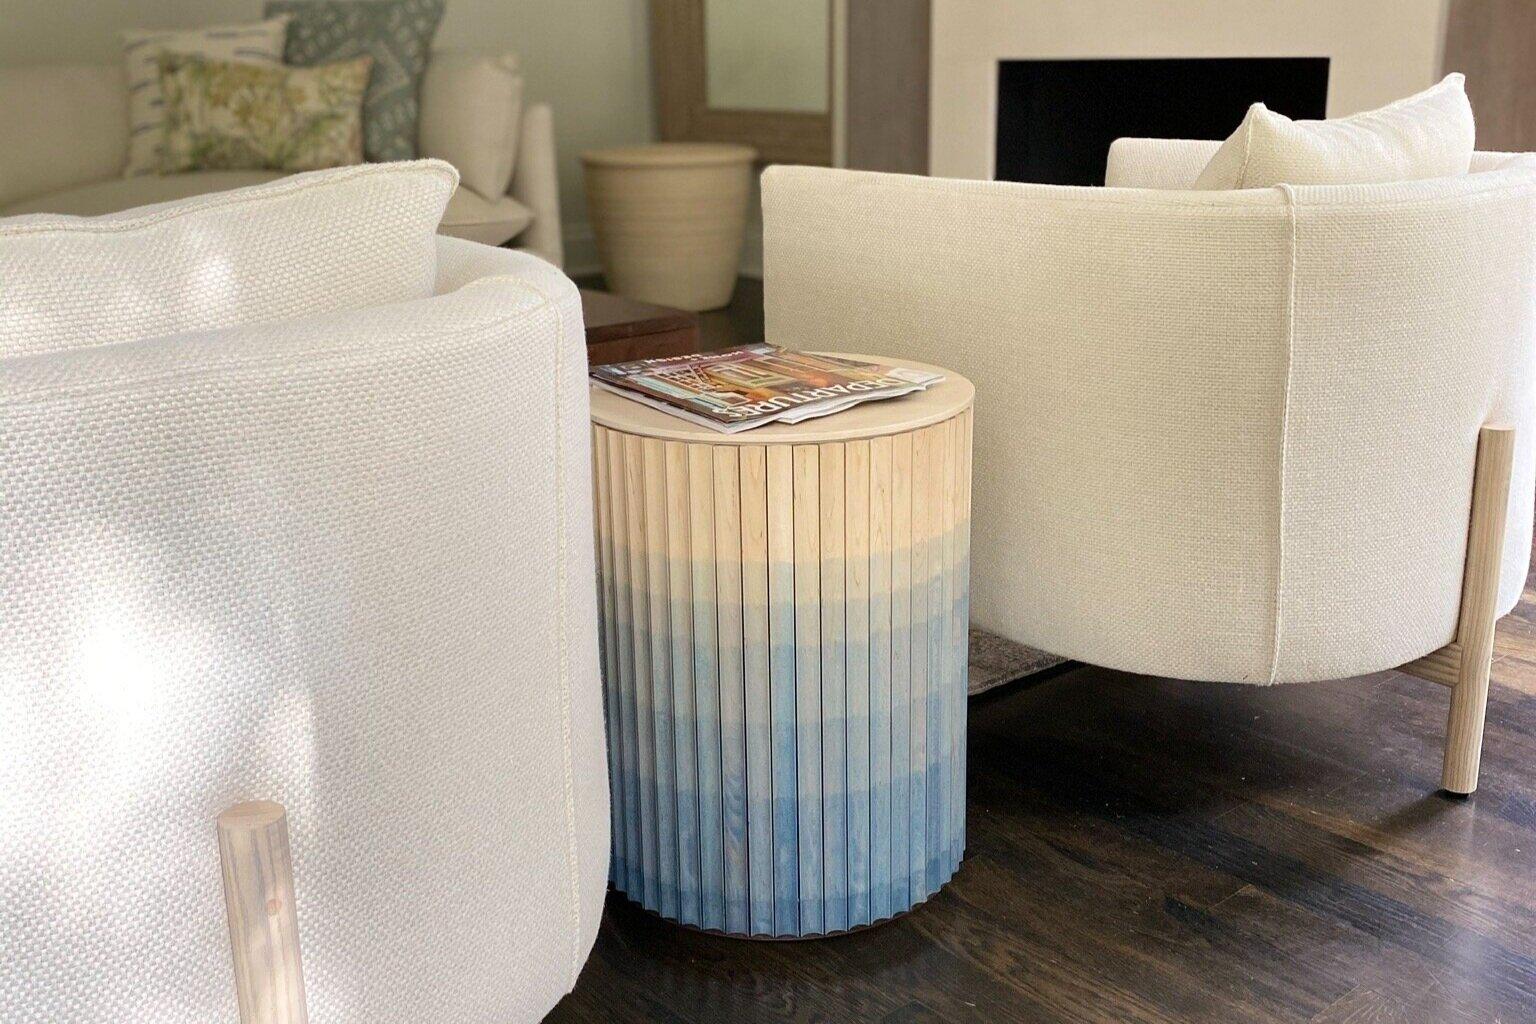 Post-Modern Pilar End Table by Indo Made For Sale